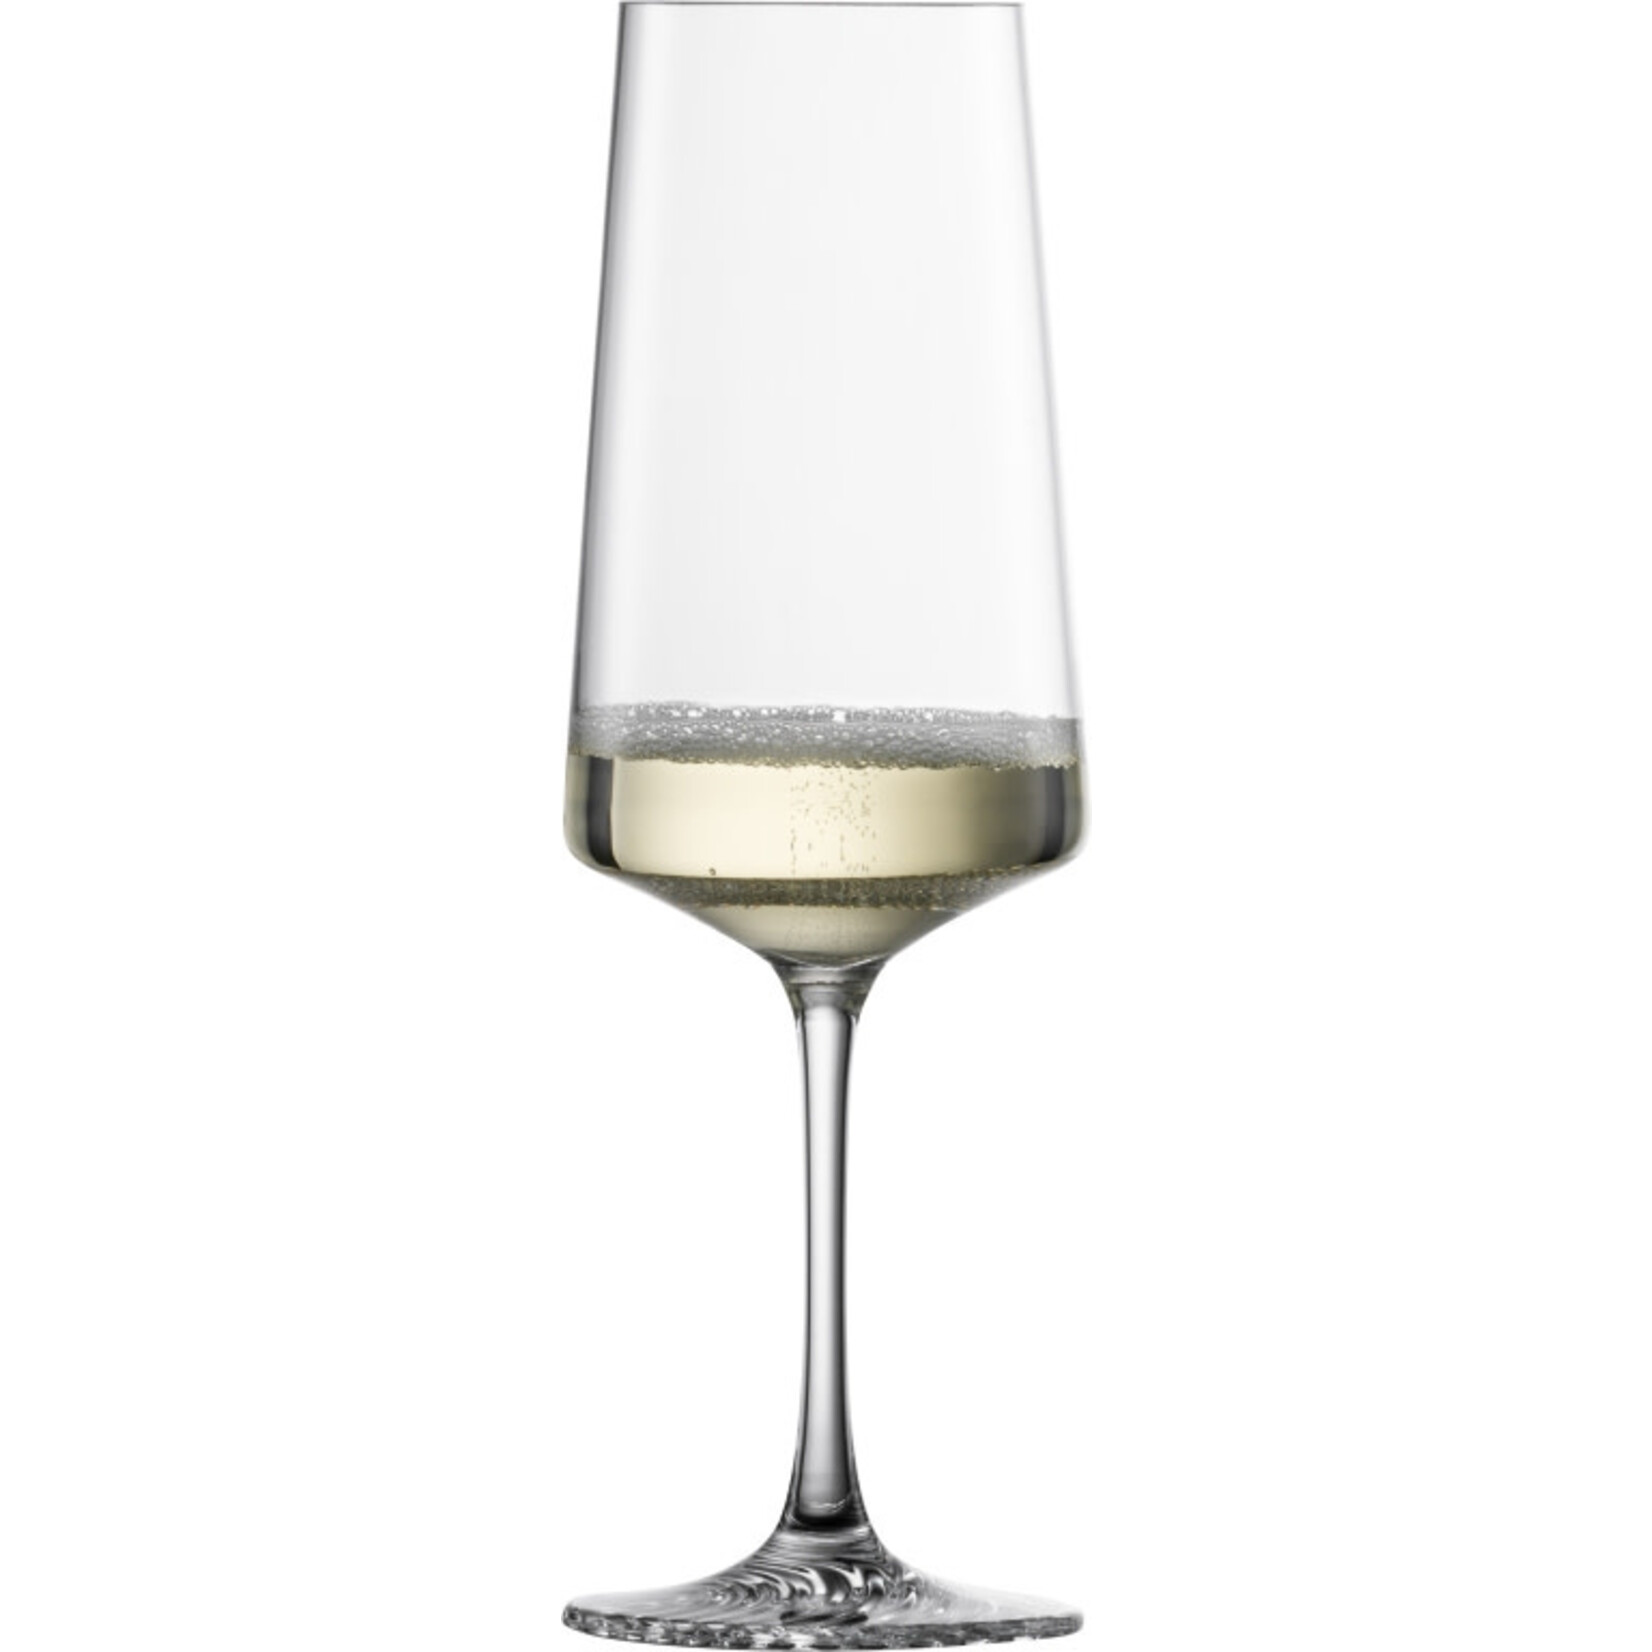 Zwiesel Collection Glas Echo-77 Champagne Glas Zwiesel glas Echo Champagne 395 ml Zwiesel Glas 123382